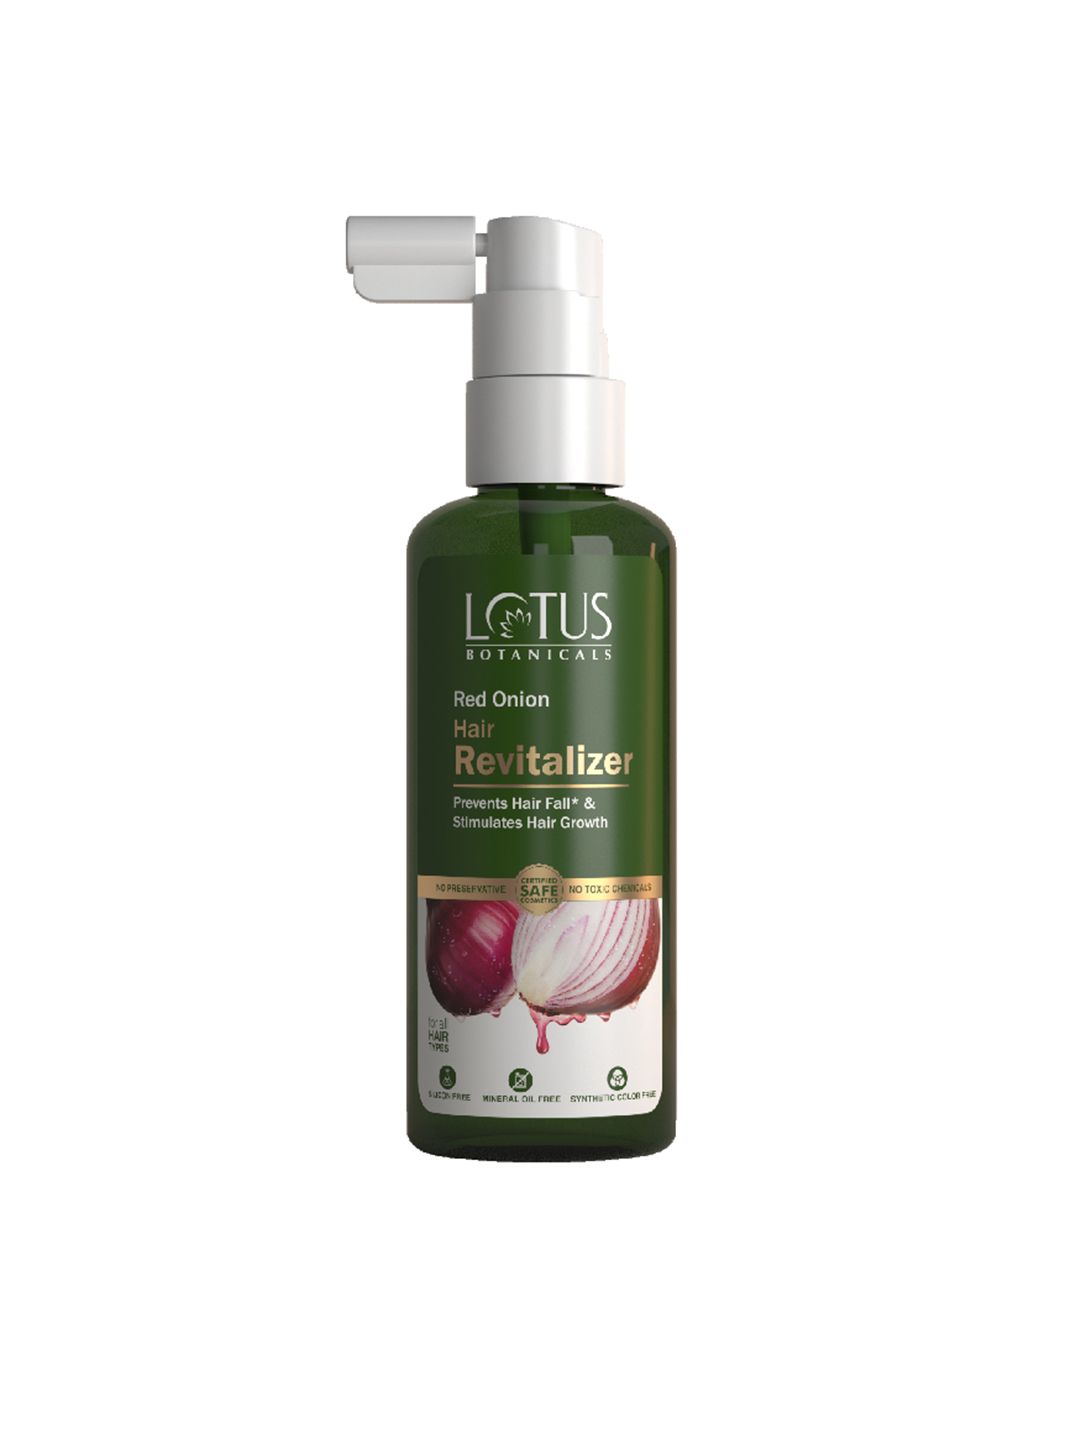 Lotus Botanicals Red Onion Hair Revitalizer with Ginseng 100 ml Price in India